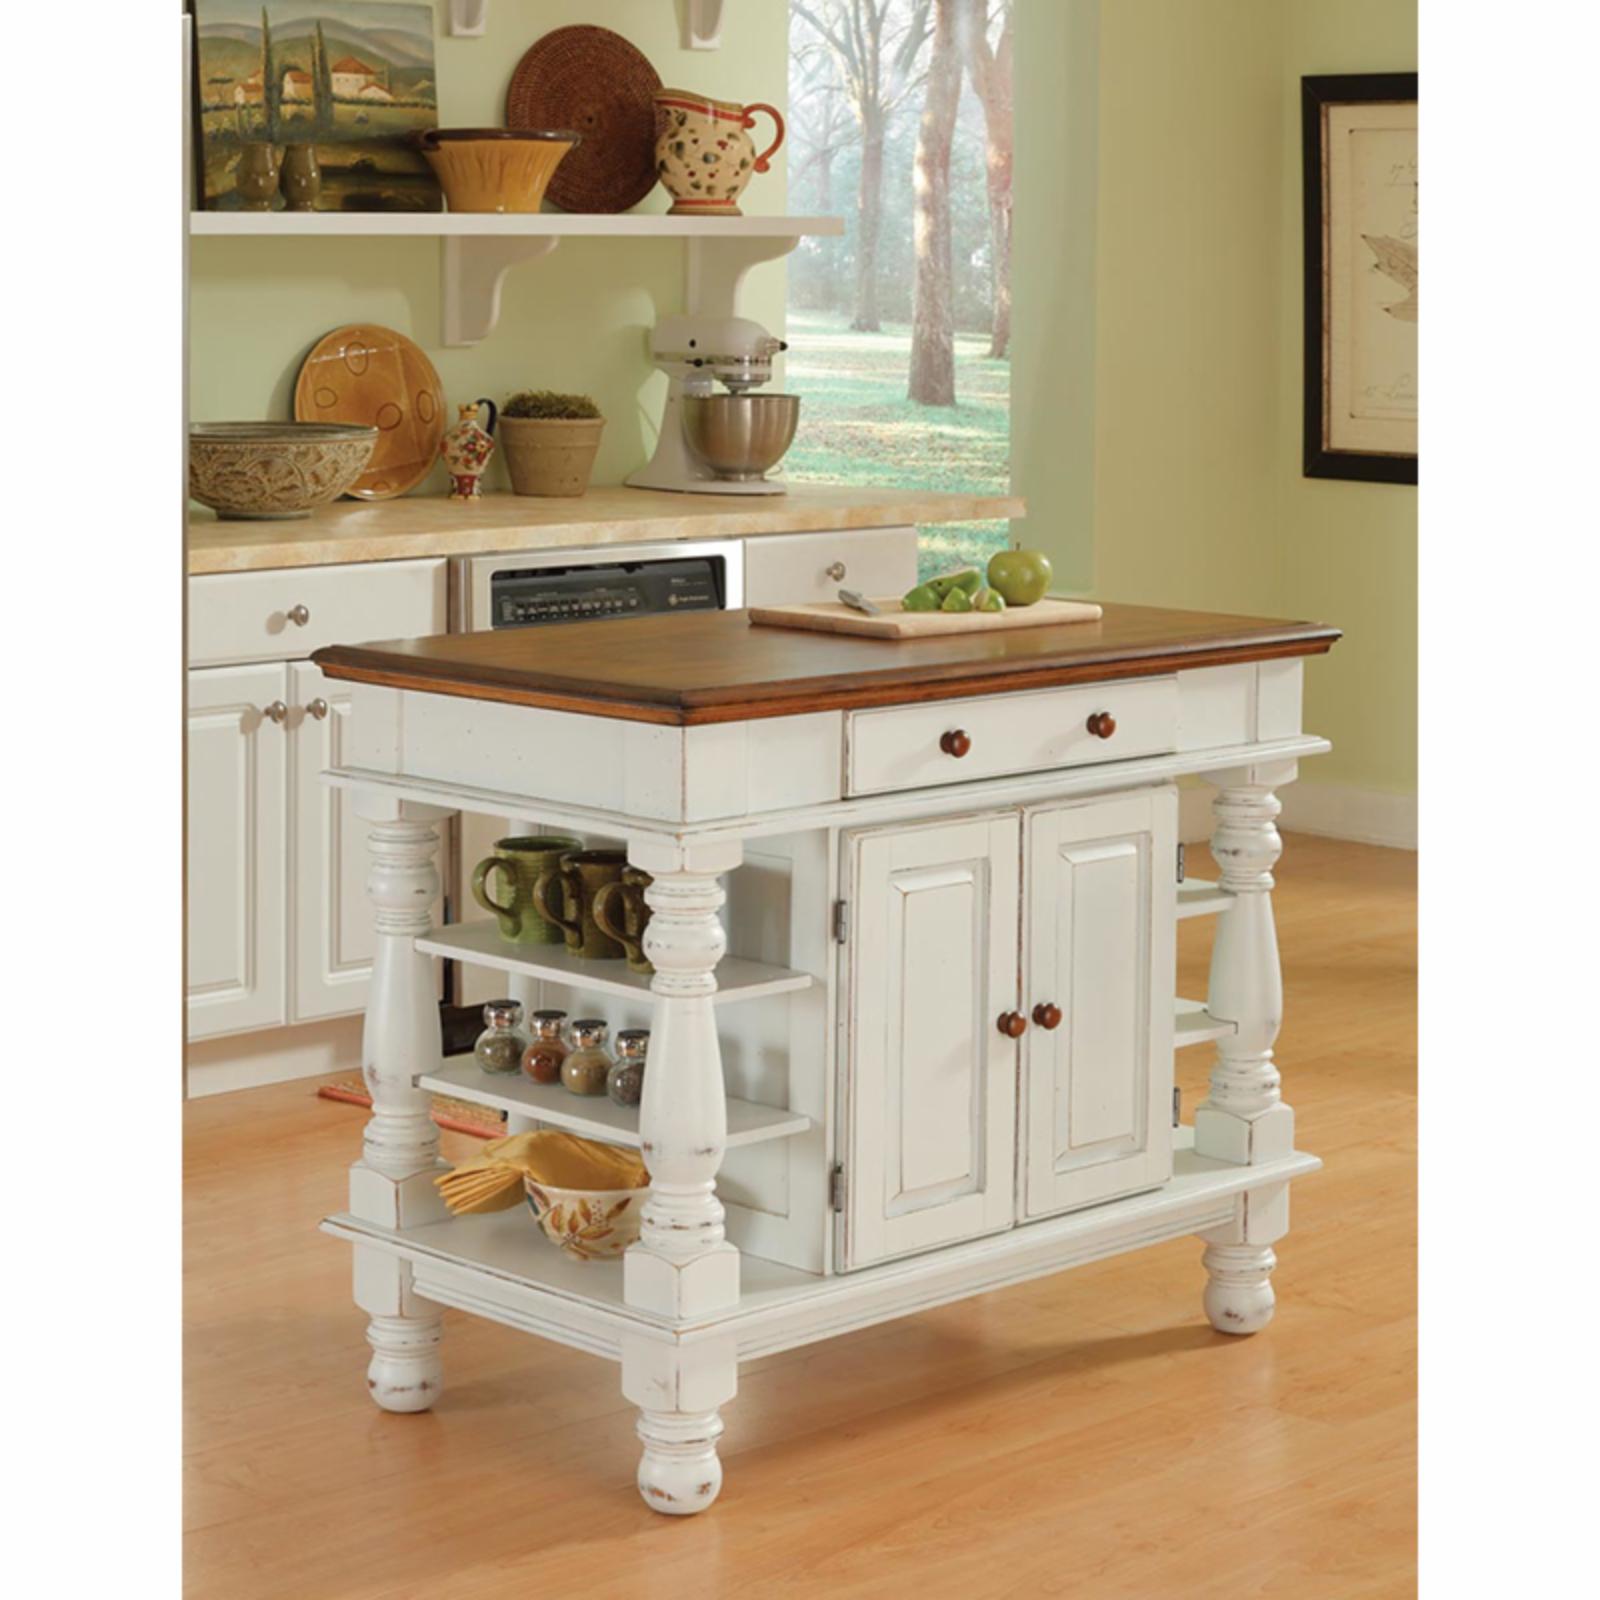 Homestyles Americana Off White Wood Kitchen Island with Storage and Open Shelves - image 2 of 2